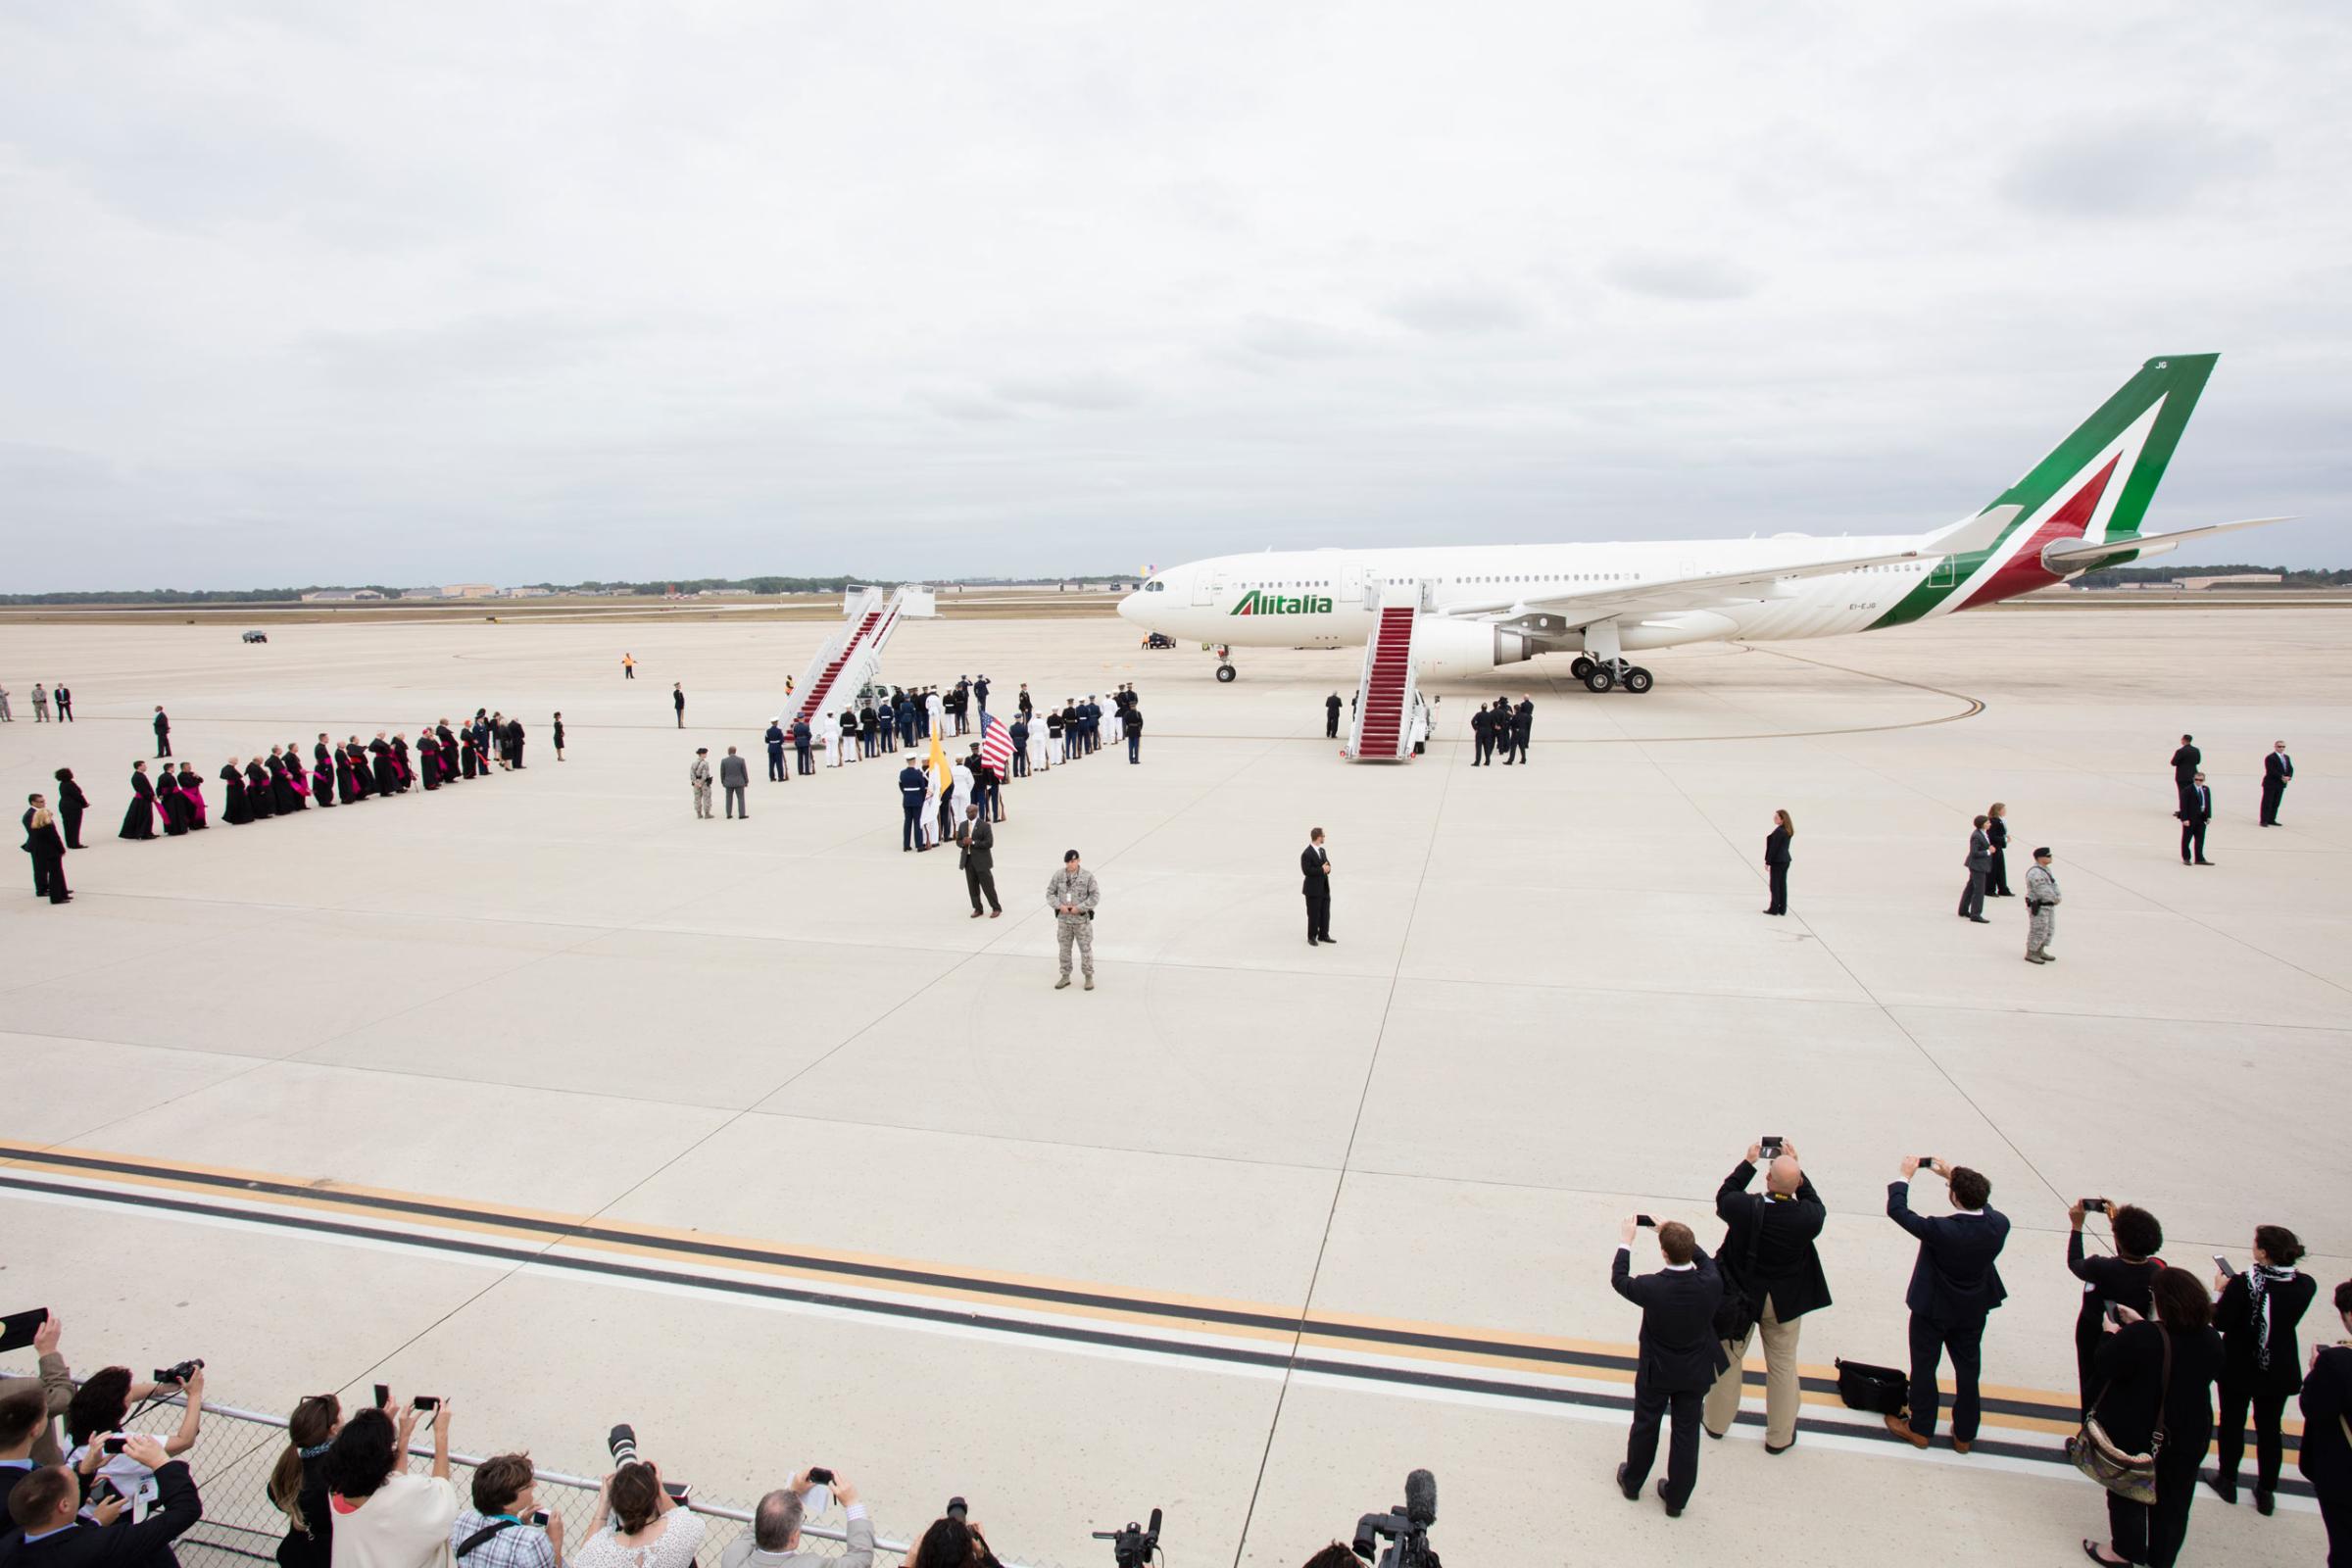 Members of the secret service, clergy, media, government and military personnel, and President Obama and his family , during the arrival of Pope Francis to the USA at Joint Base Andrews , Md., Tuesday, Sept. 22, 2015.Photograph by Tobias Hutzler for TIMEWashington, D.C. Photograph by Tobias Hutzler for TIME